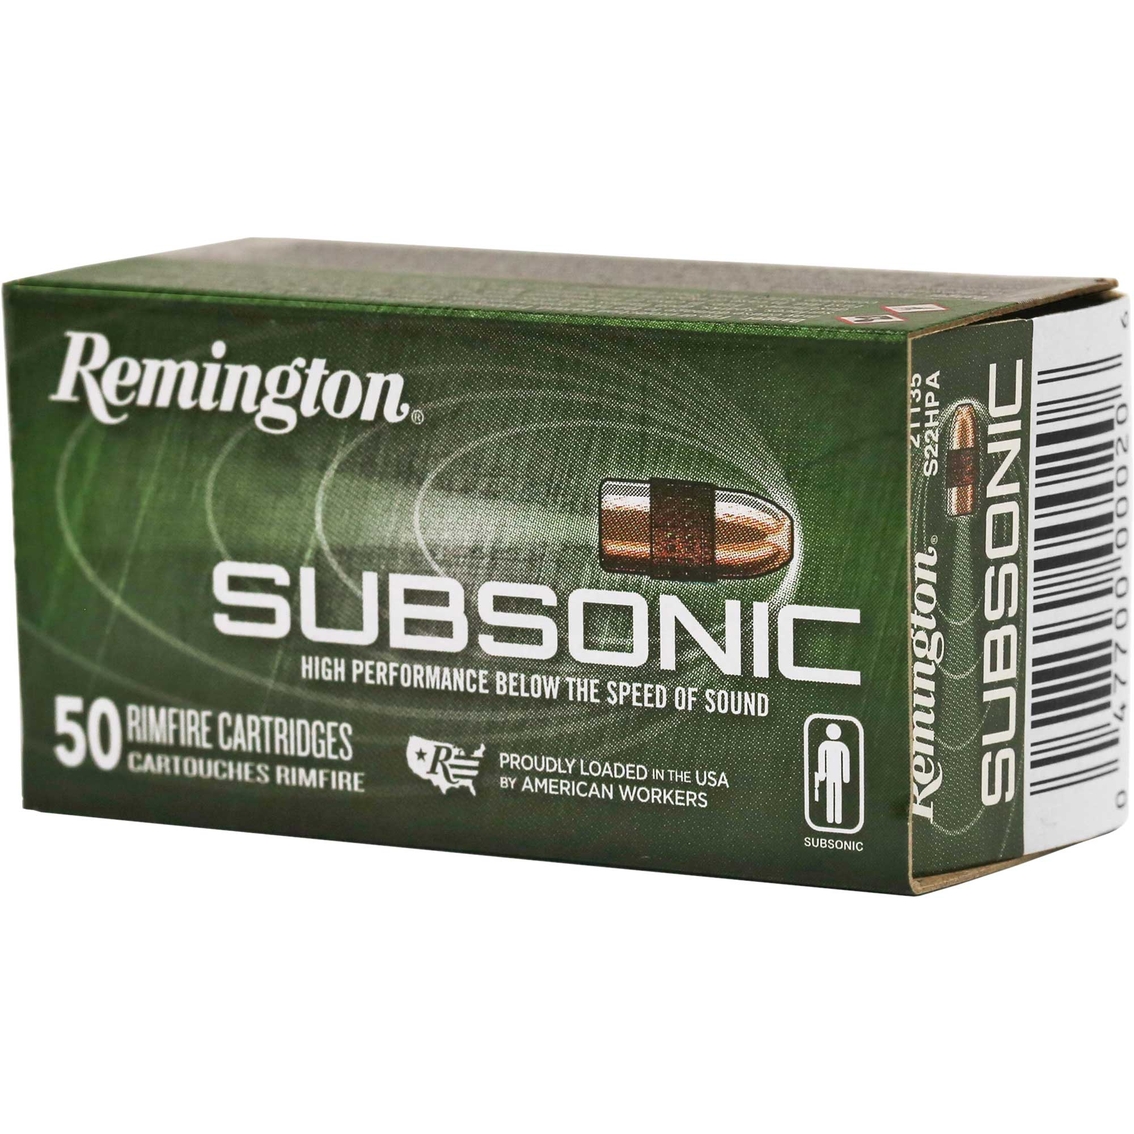 Remington Subsonic .22 LR 40 Gr. Copper Plated Hollow Point 50 Rounds - Image 3 of 3